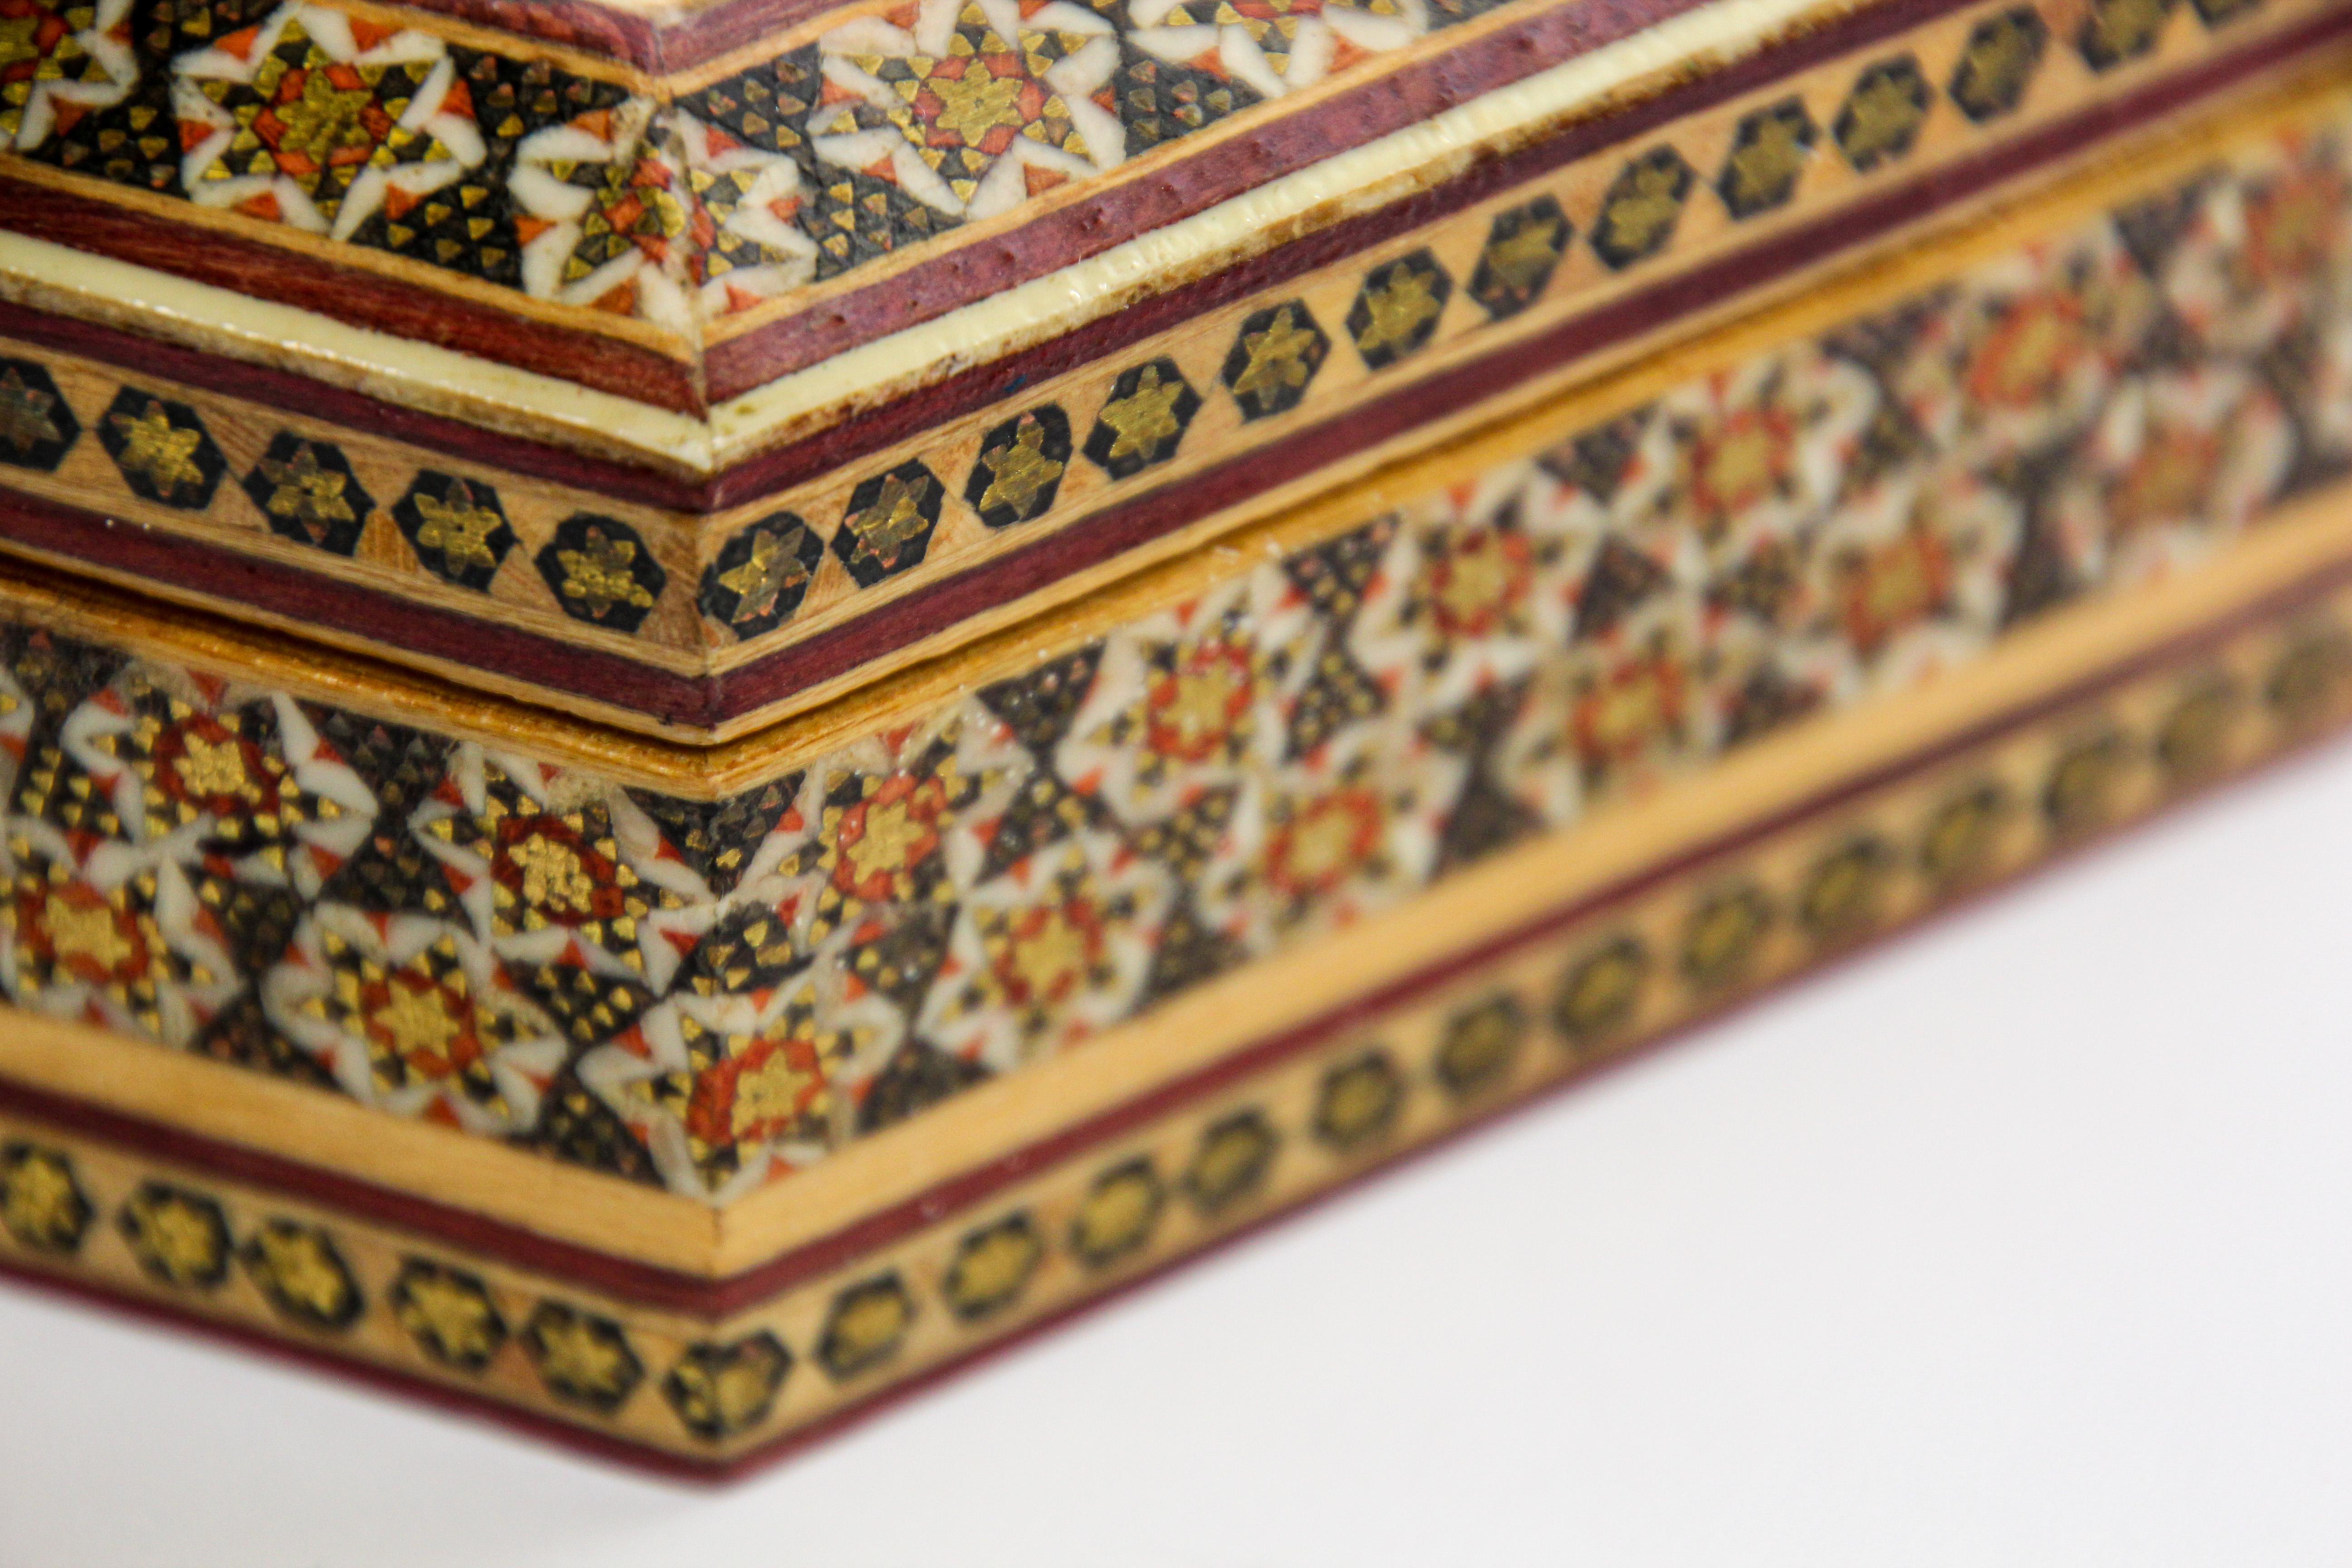 Khatam Persian Micro Mosaic Marquetry Inlaid Jewelry Trinket Box 1950's For Sale 3